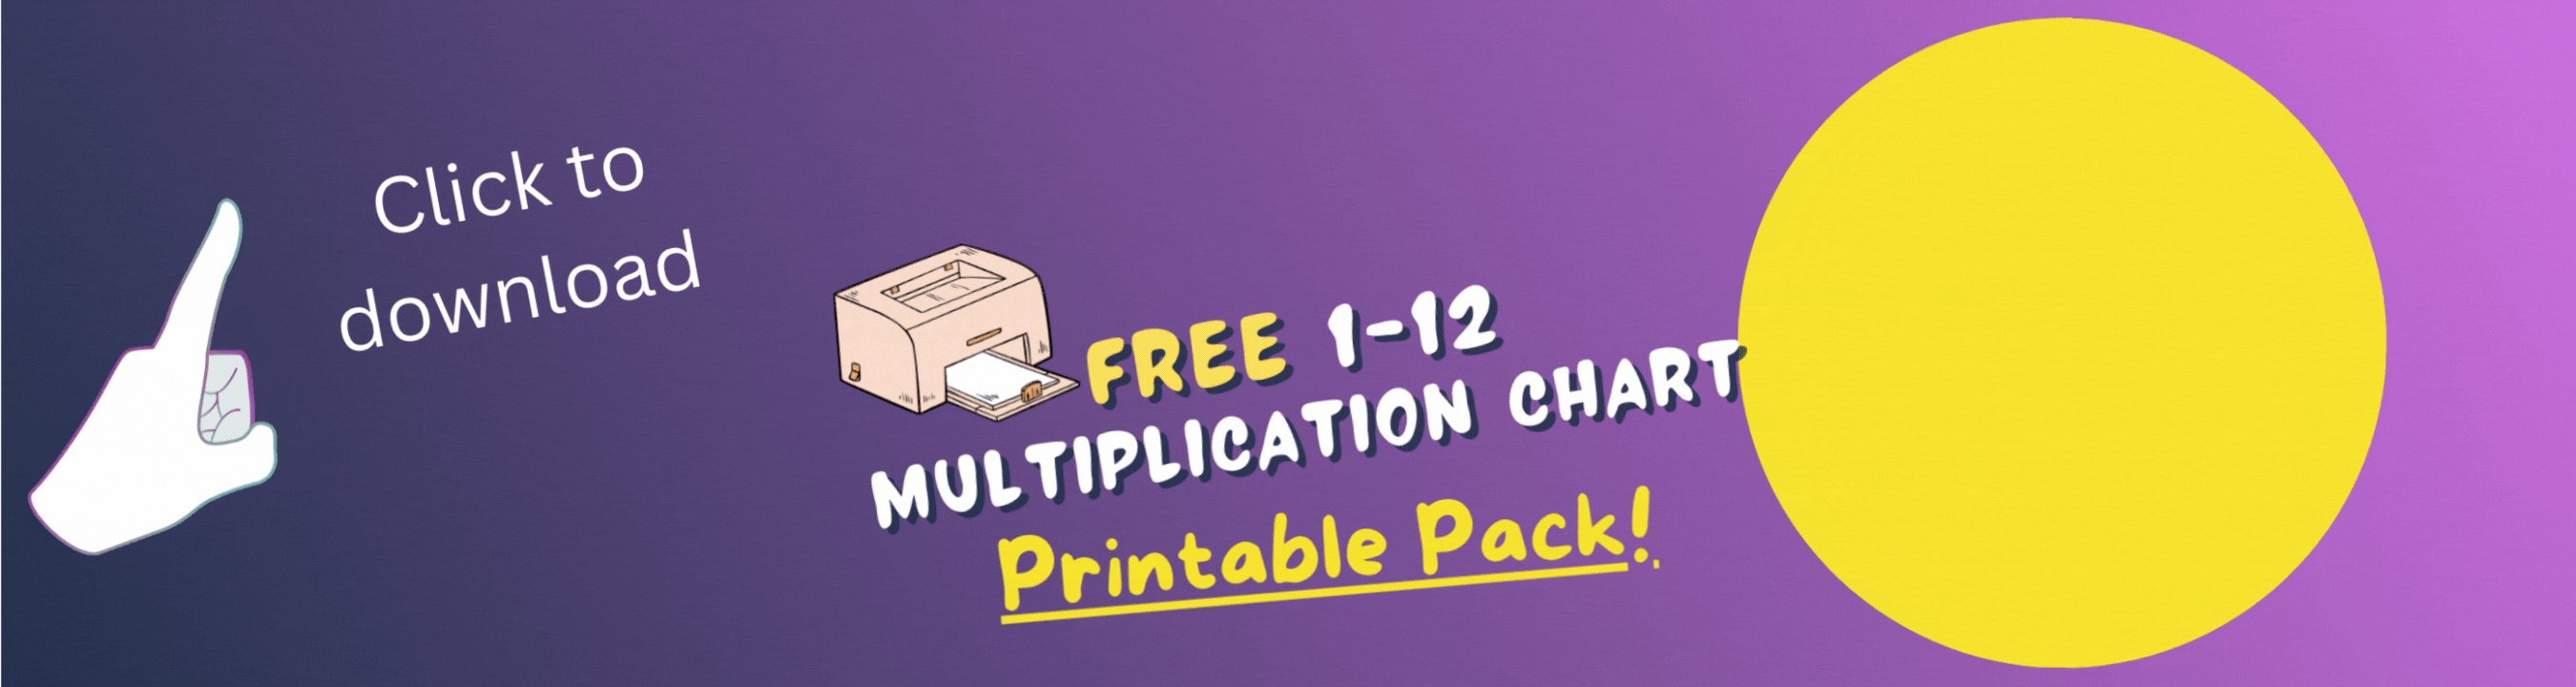 Click to download free multiplication chart printable